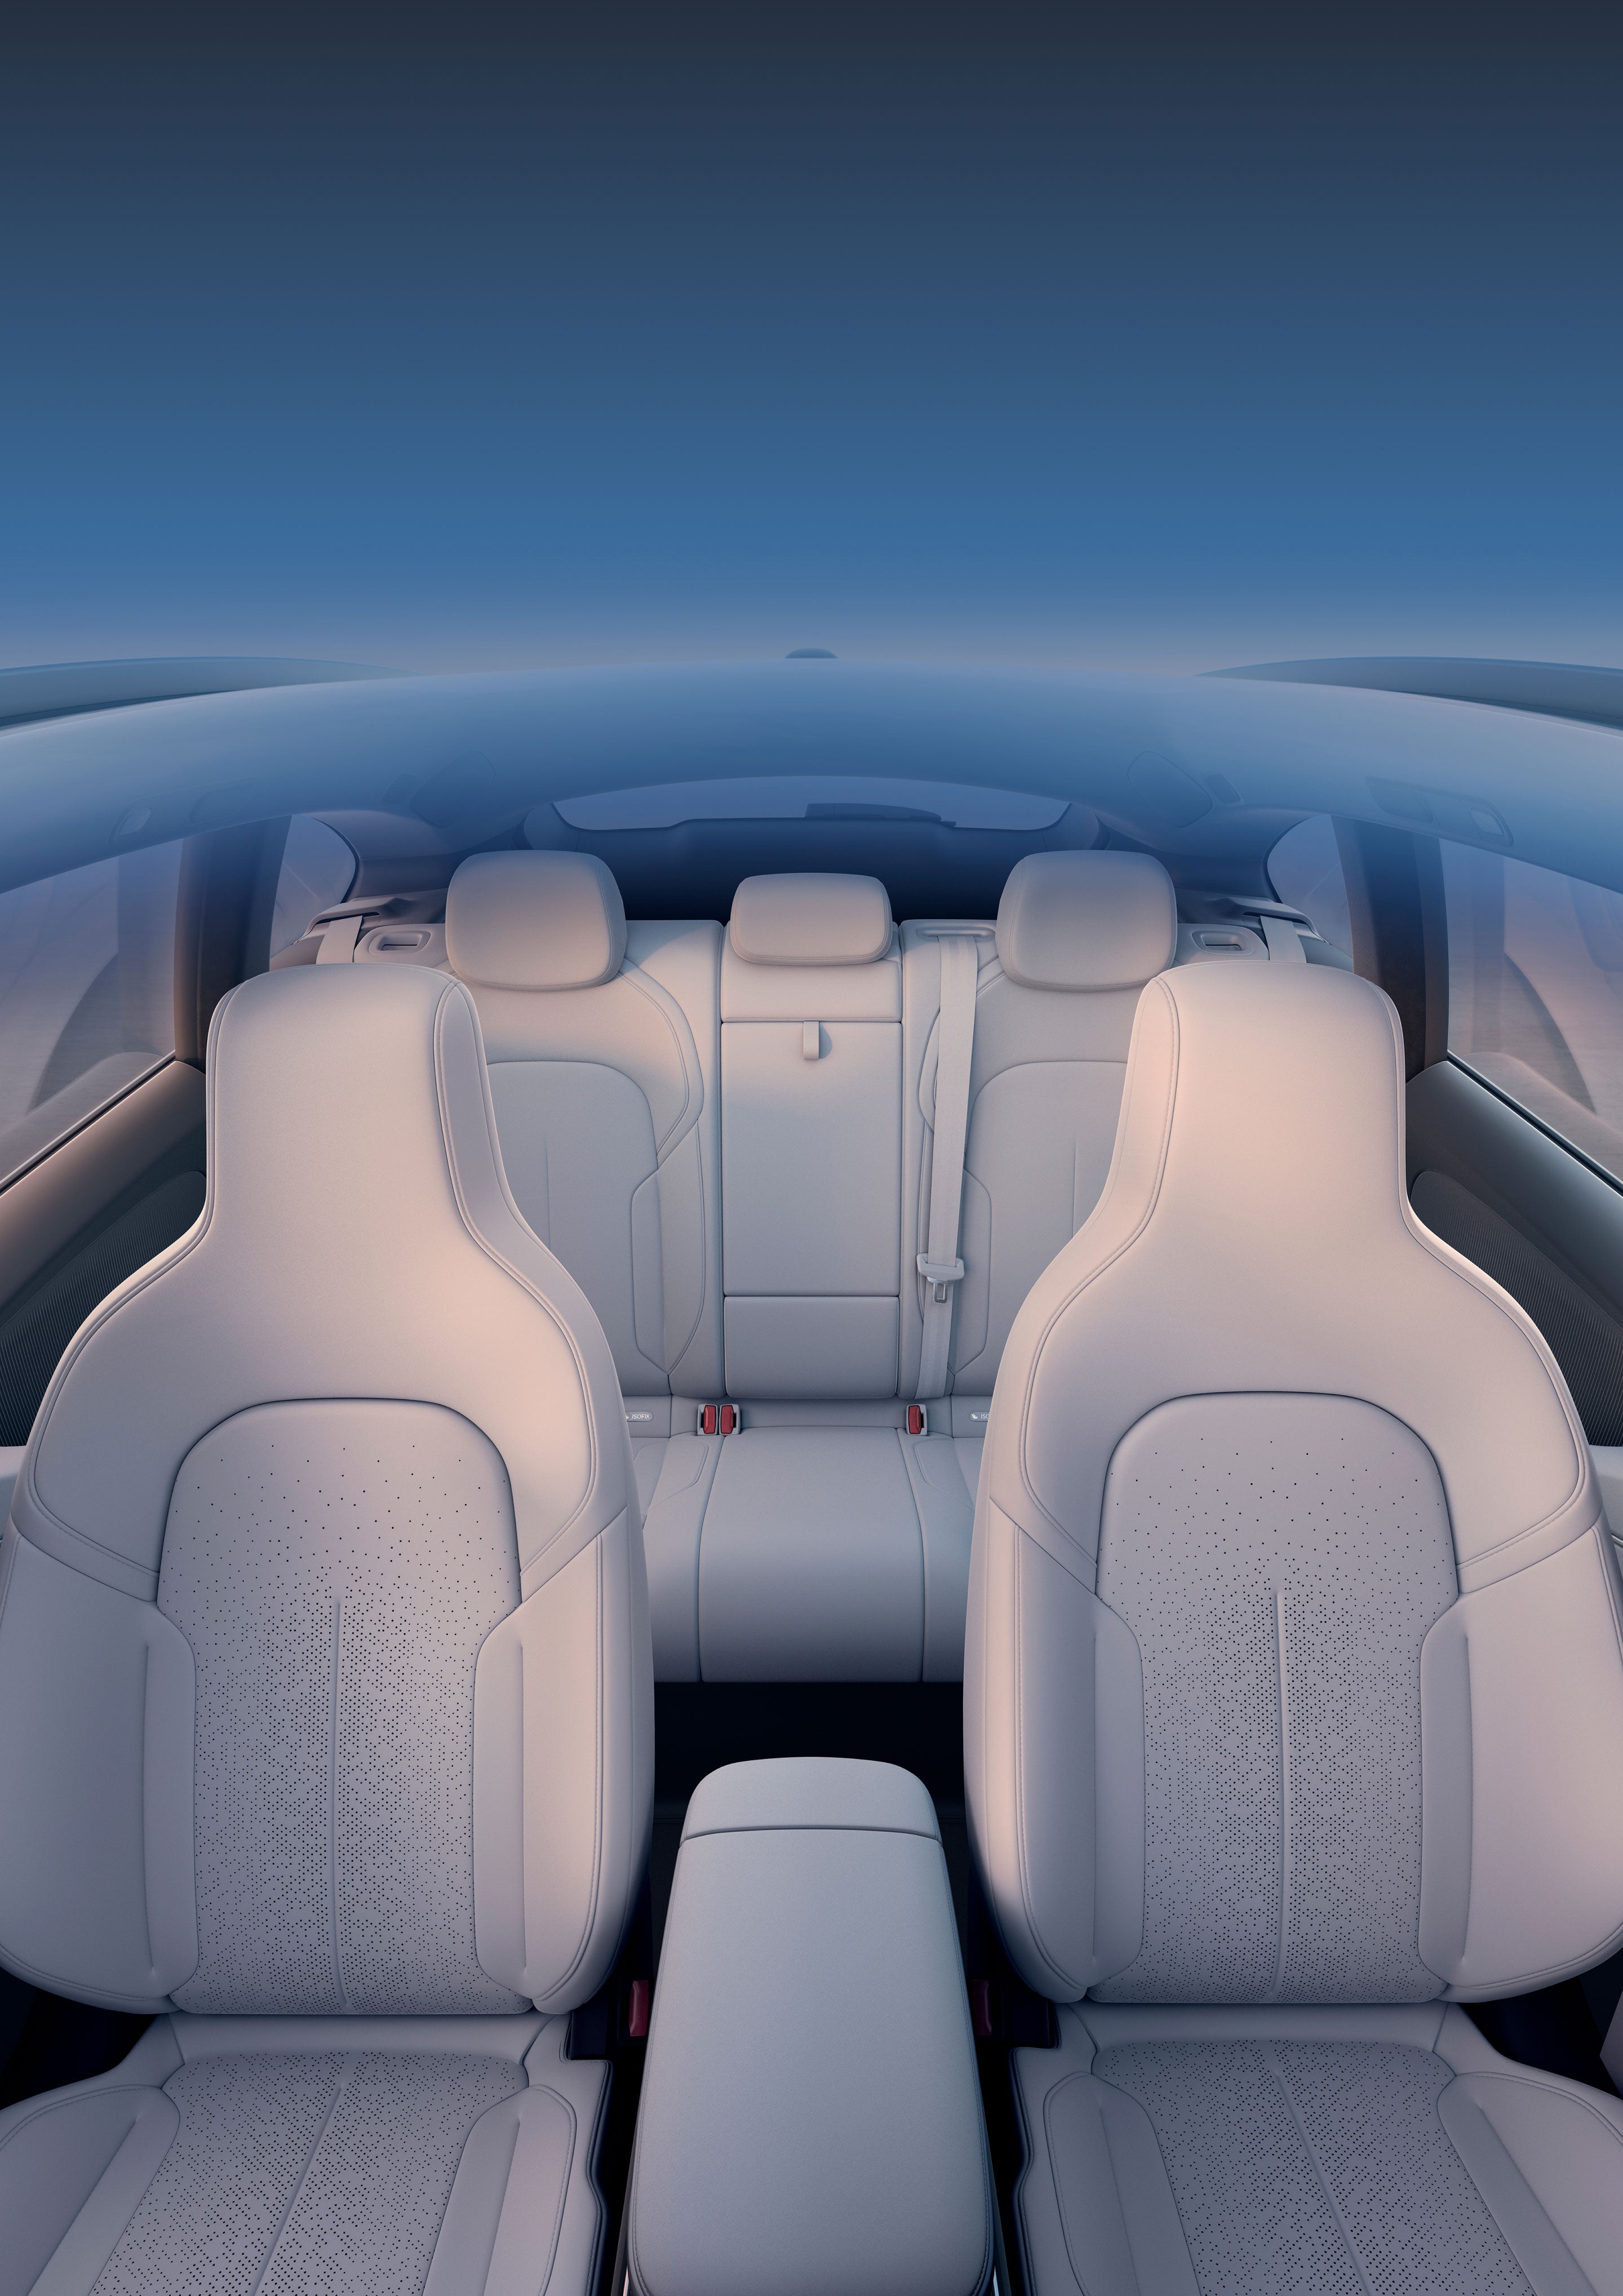 The interior is lit up by the expansive panoramic glass sunroof, allowing for an ultra-large daylighting area of 1.35㎡ which brings the outside world into the cabin, helping bringing a sense of light and joy to the journey.